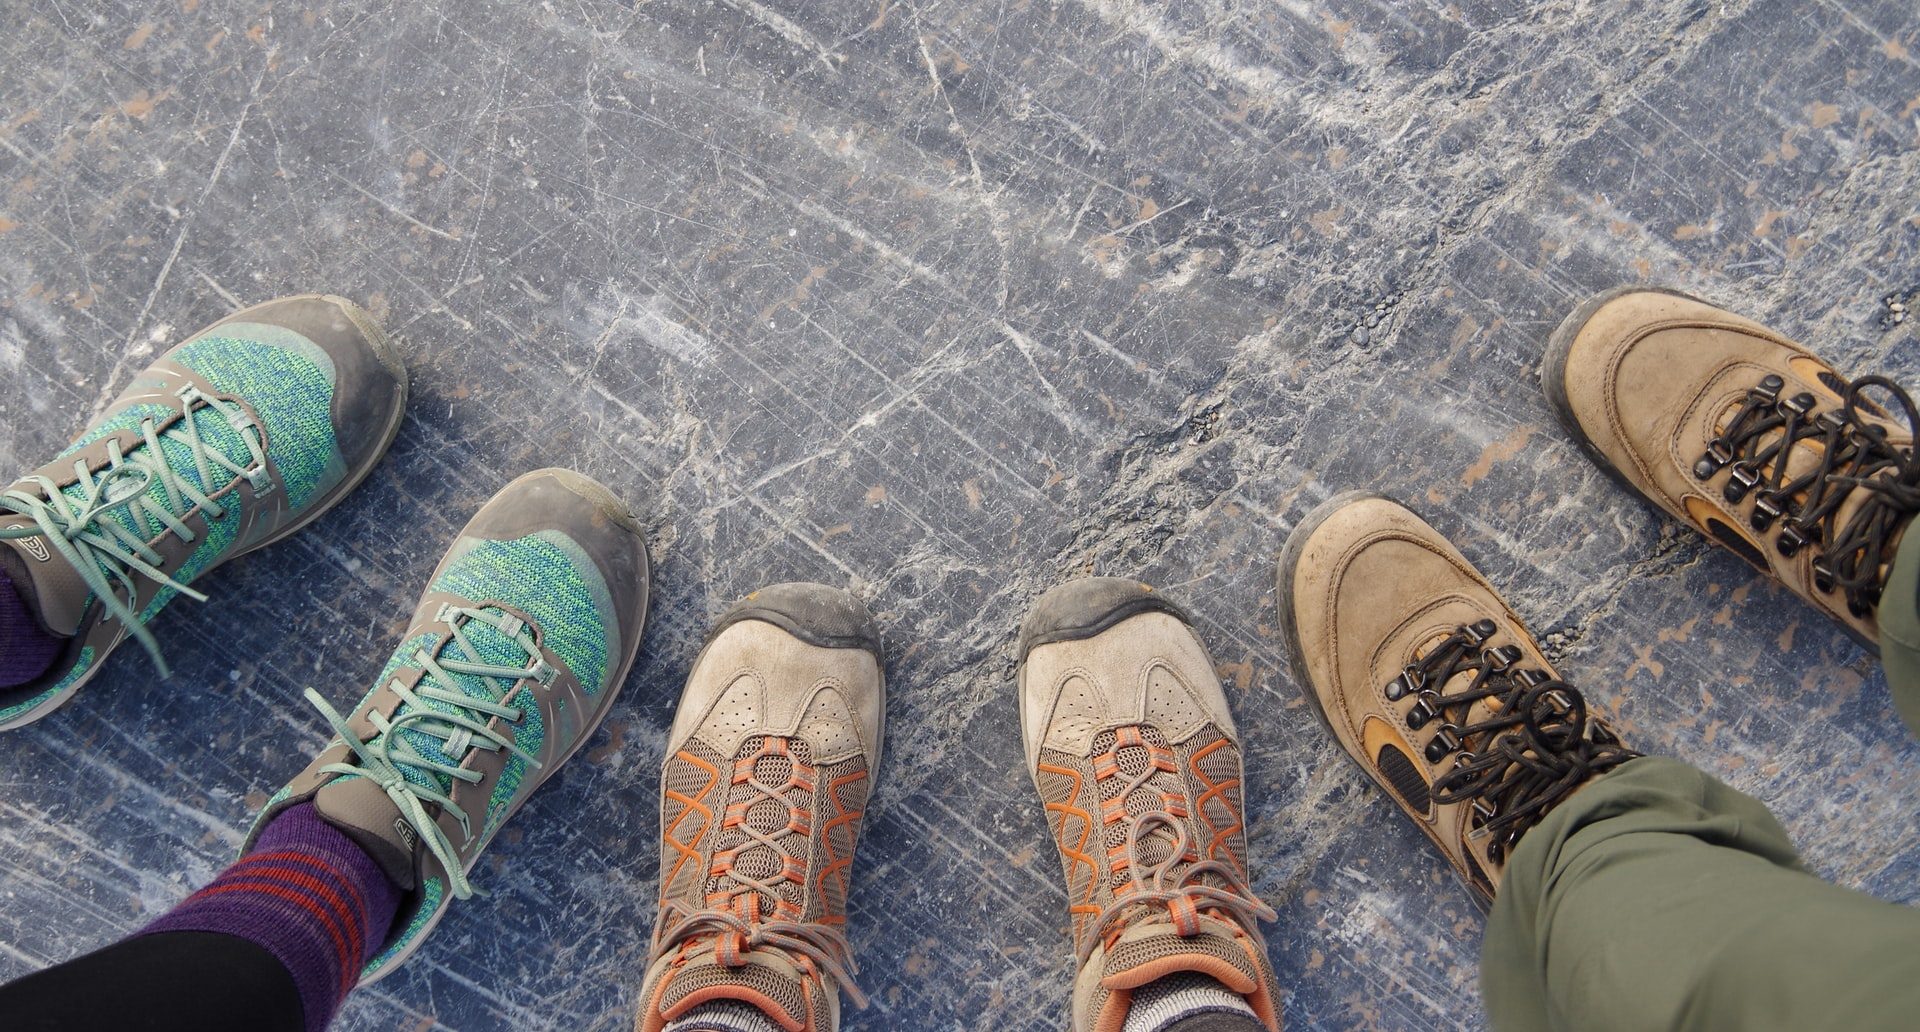 Sorel vs. Kamik: Which Boots Are for You?